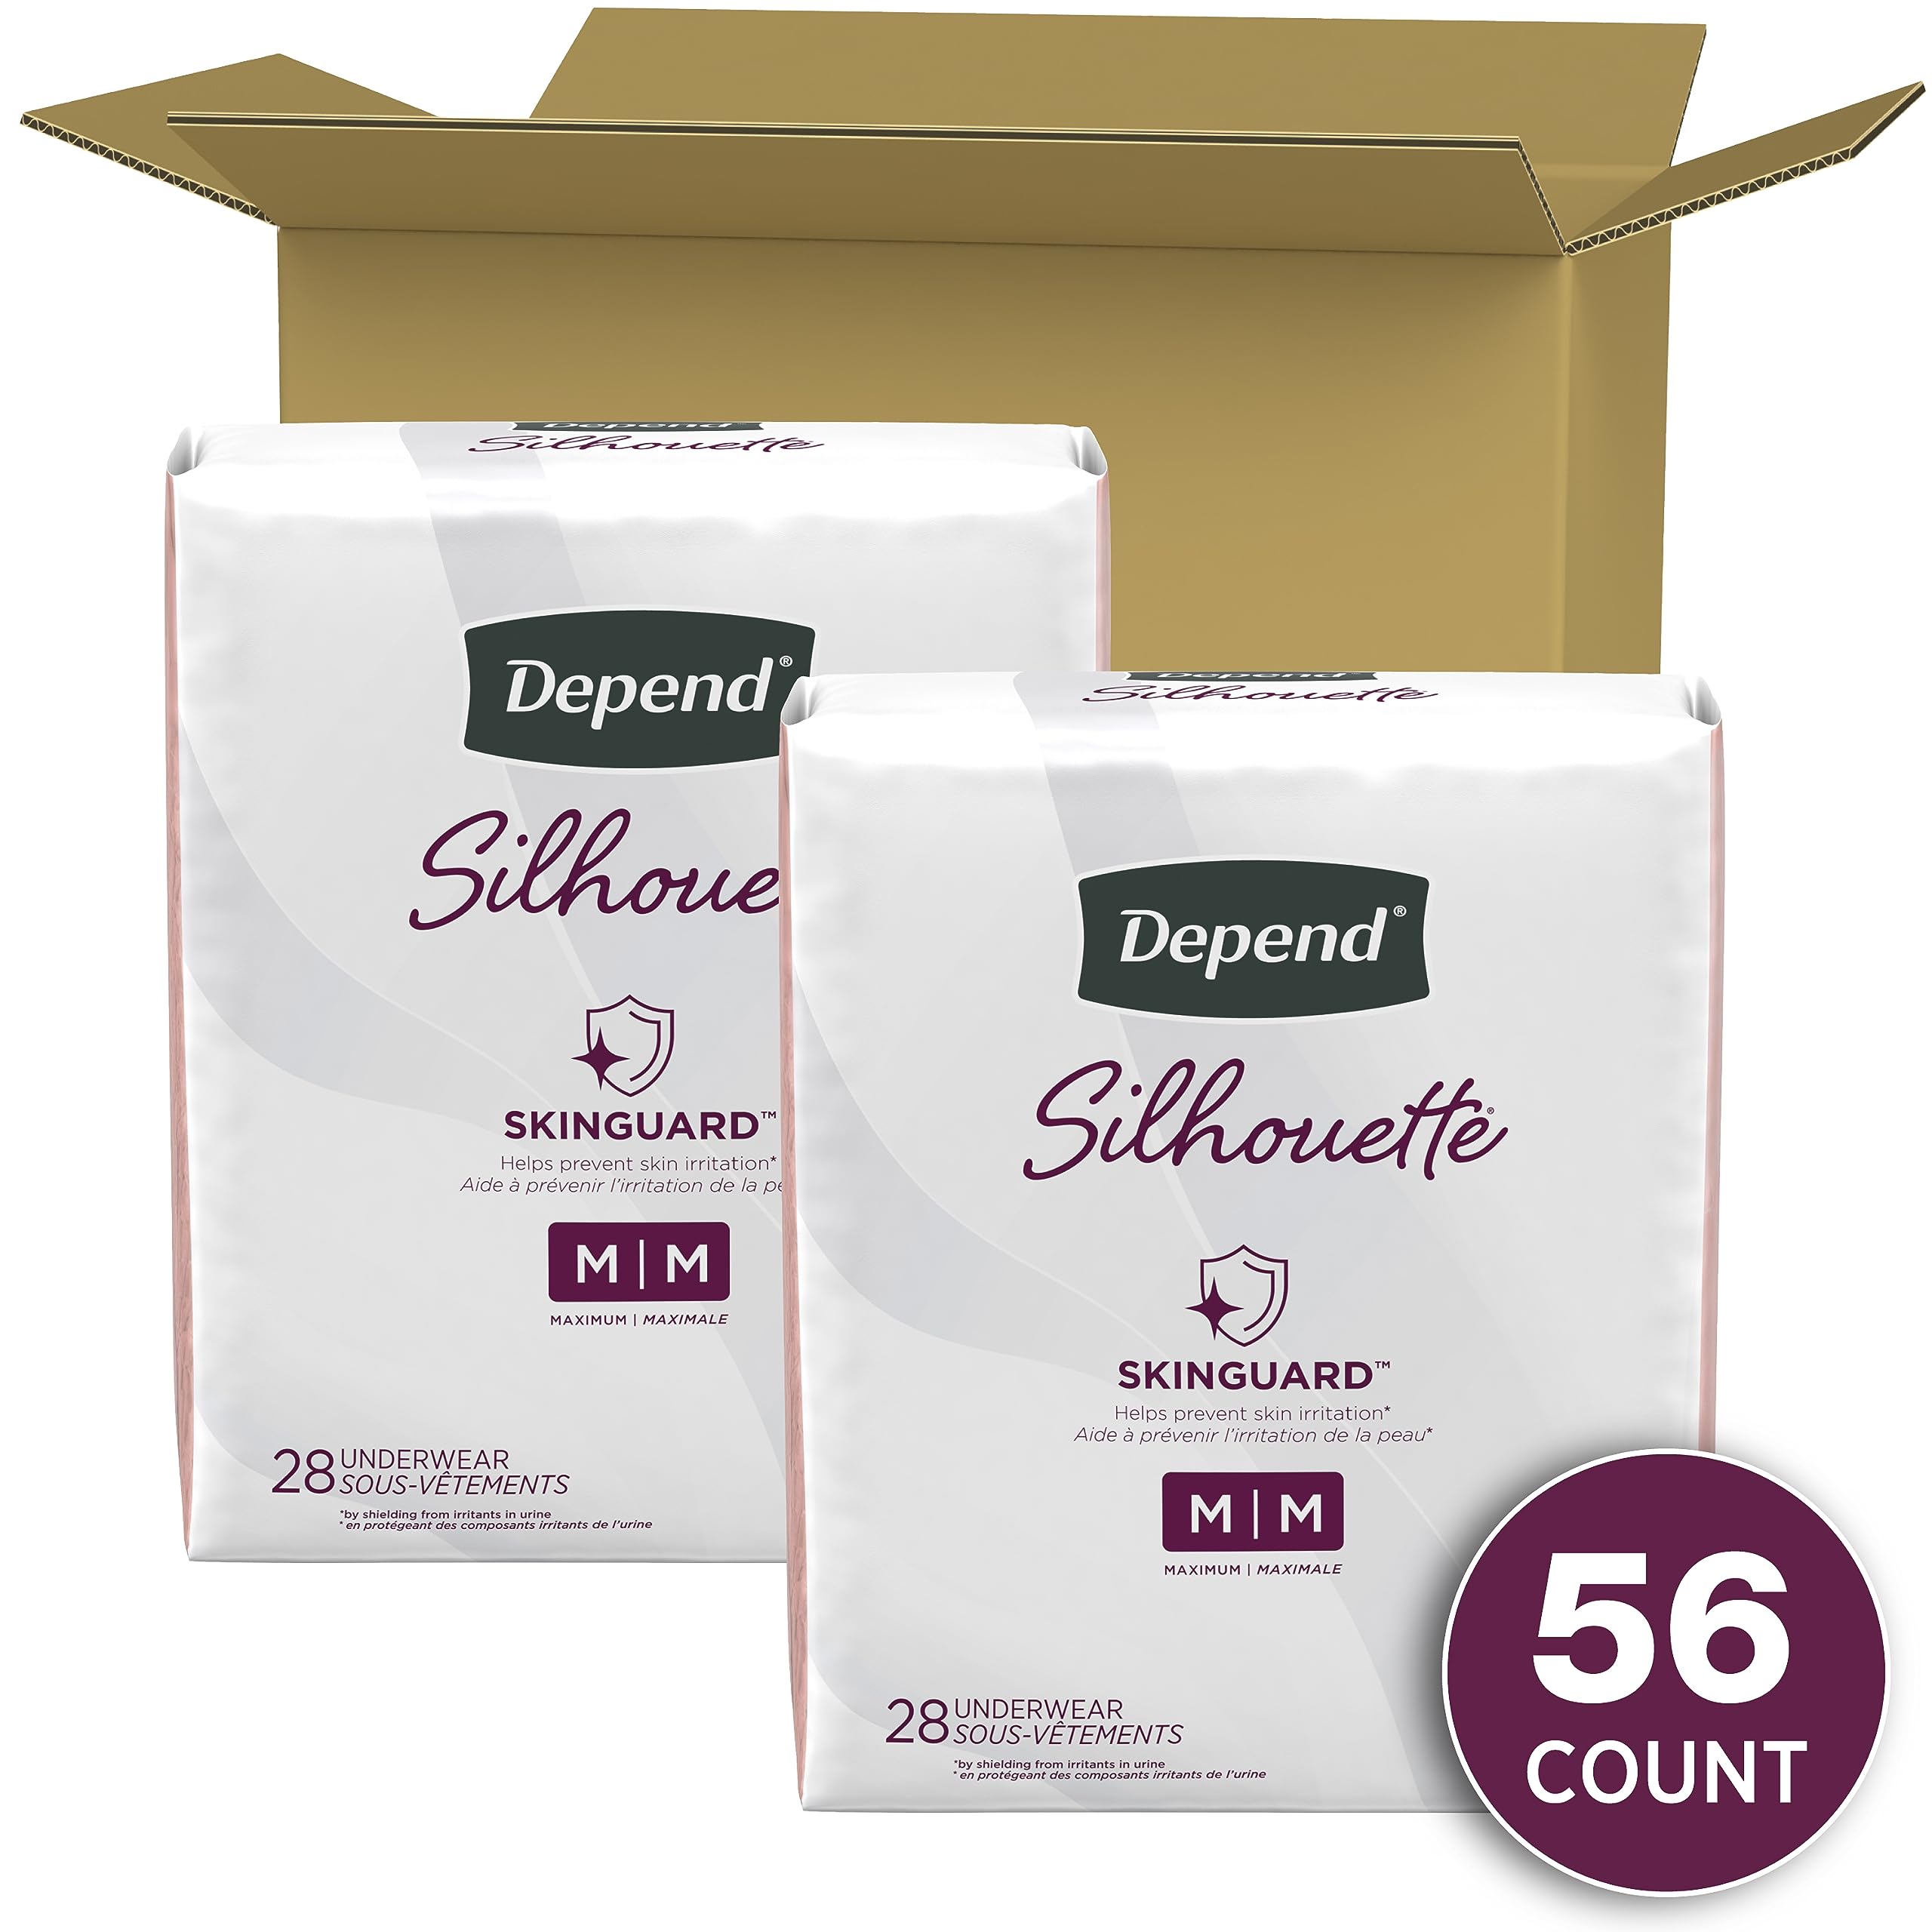 Depend Silhouette Women's Incontinence Underwear, Medium, Maximum Absorbency - 56 Count (2 Packs of 28)